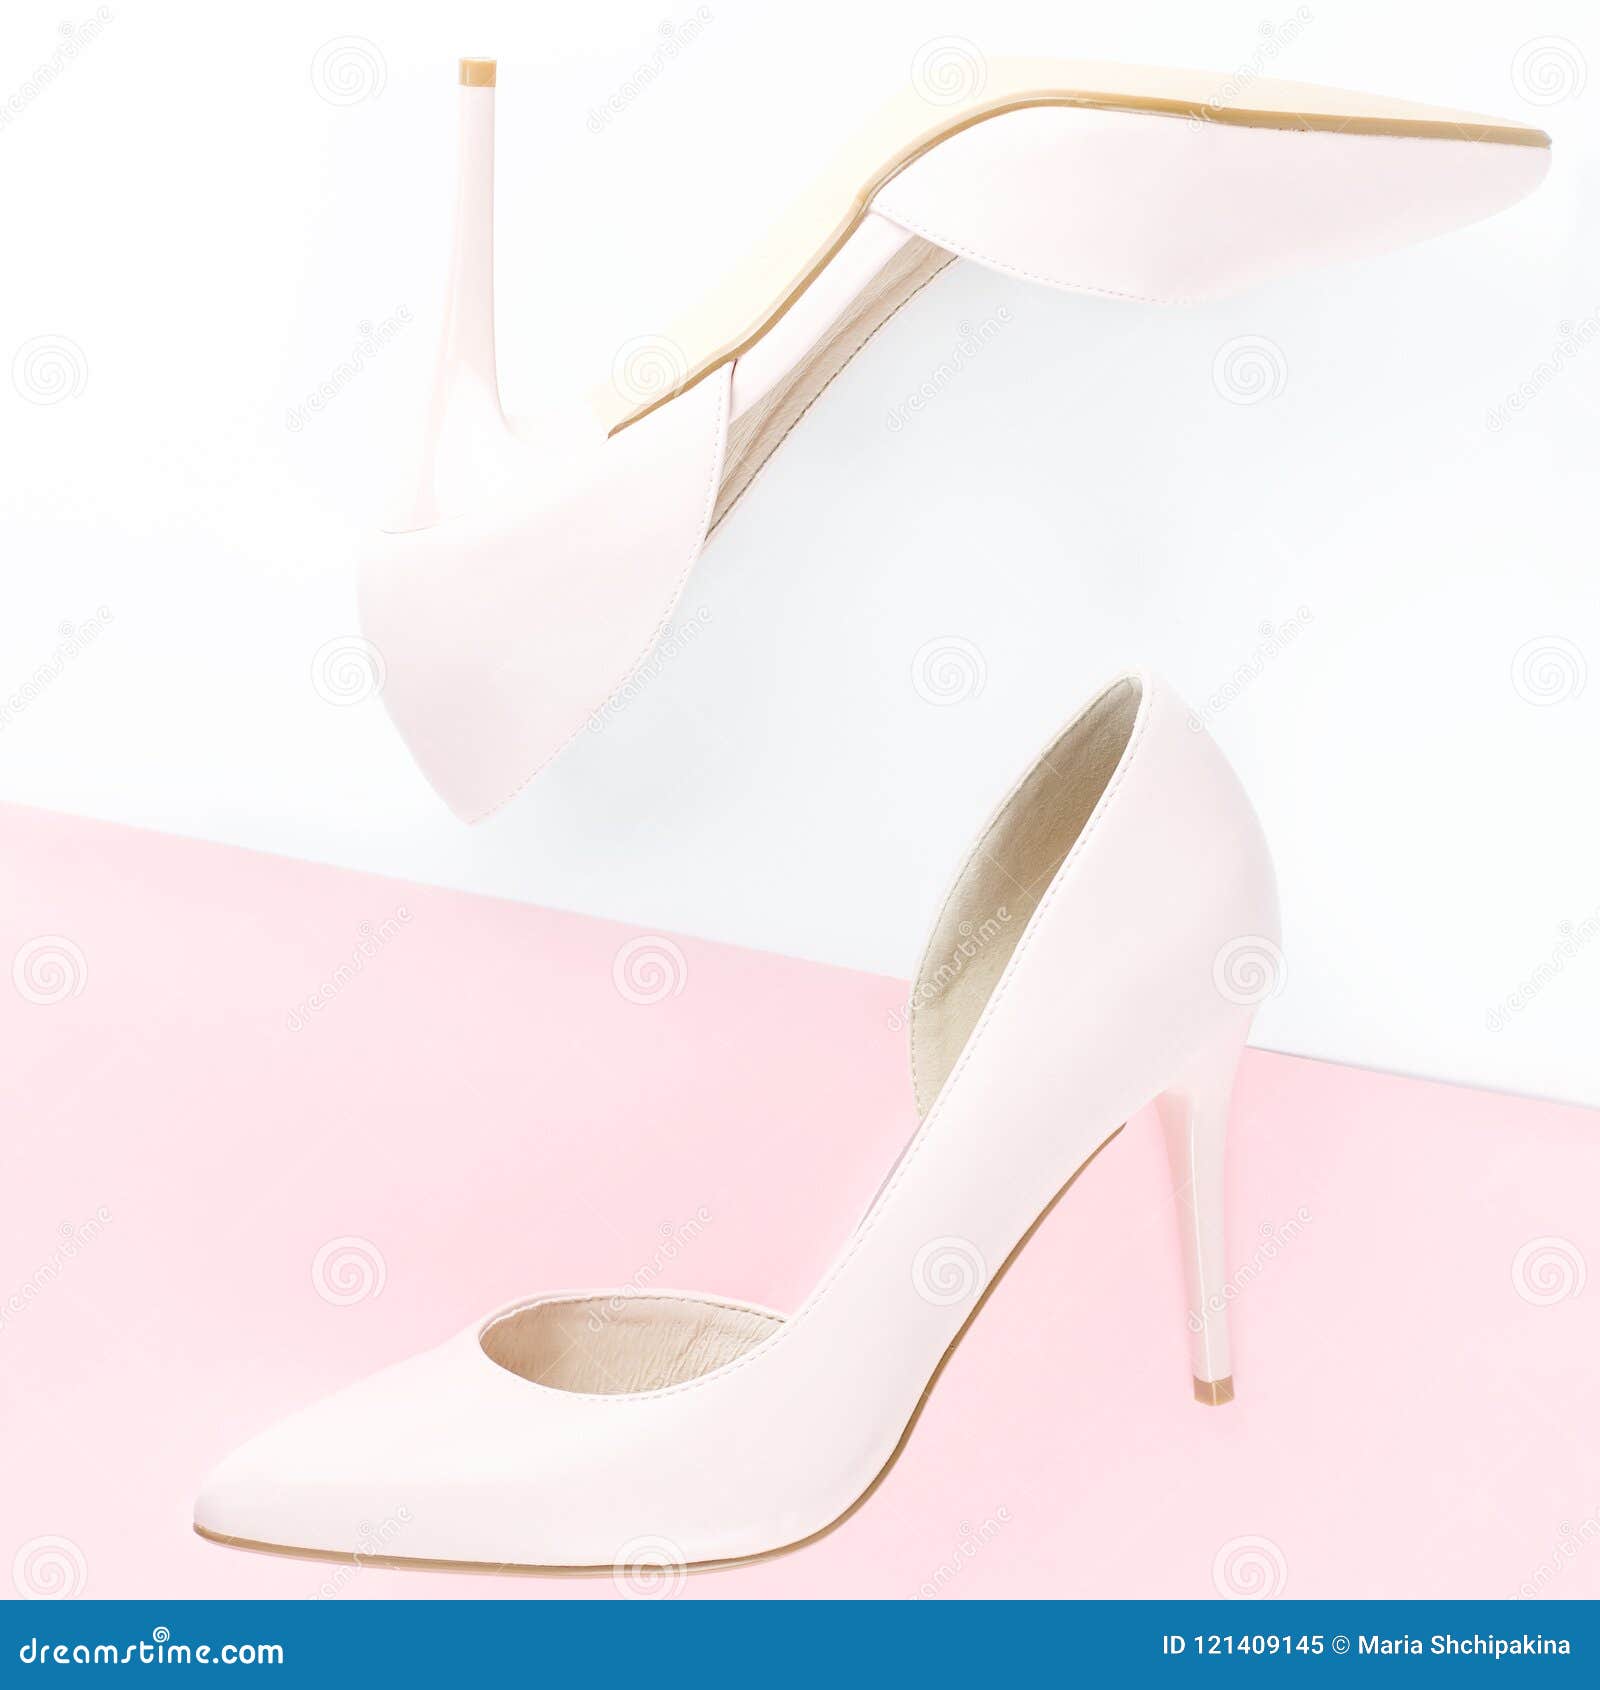 pink and white pumps